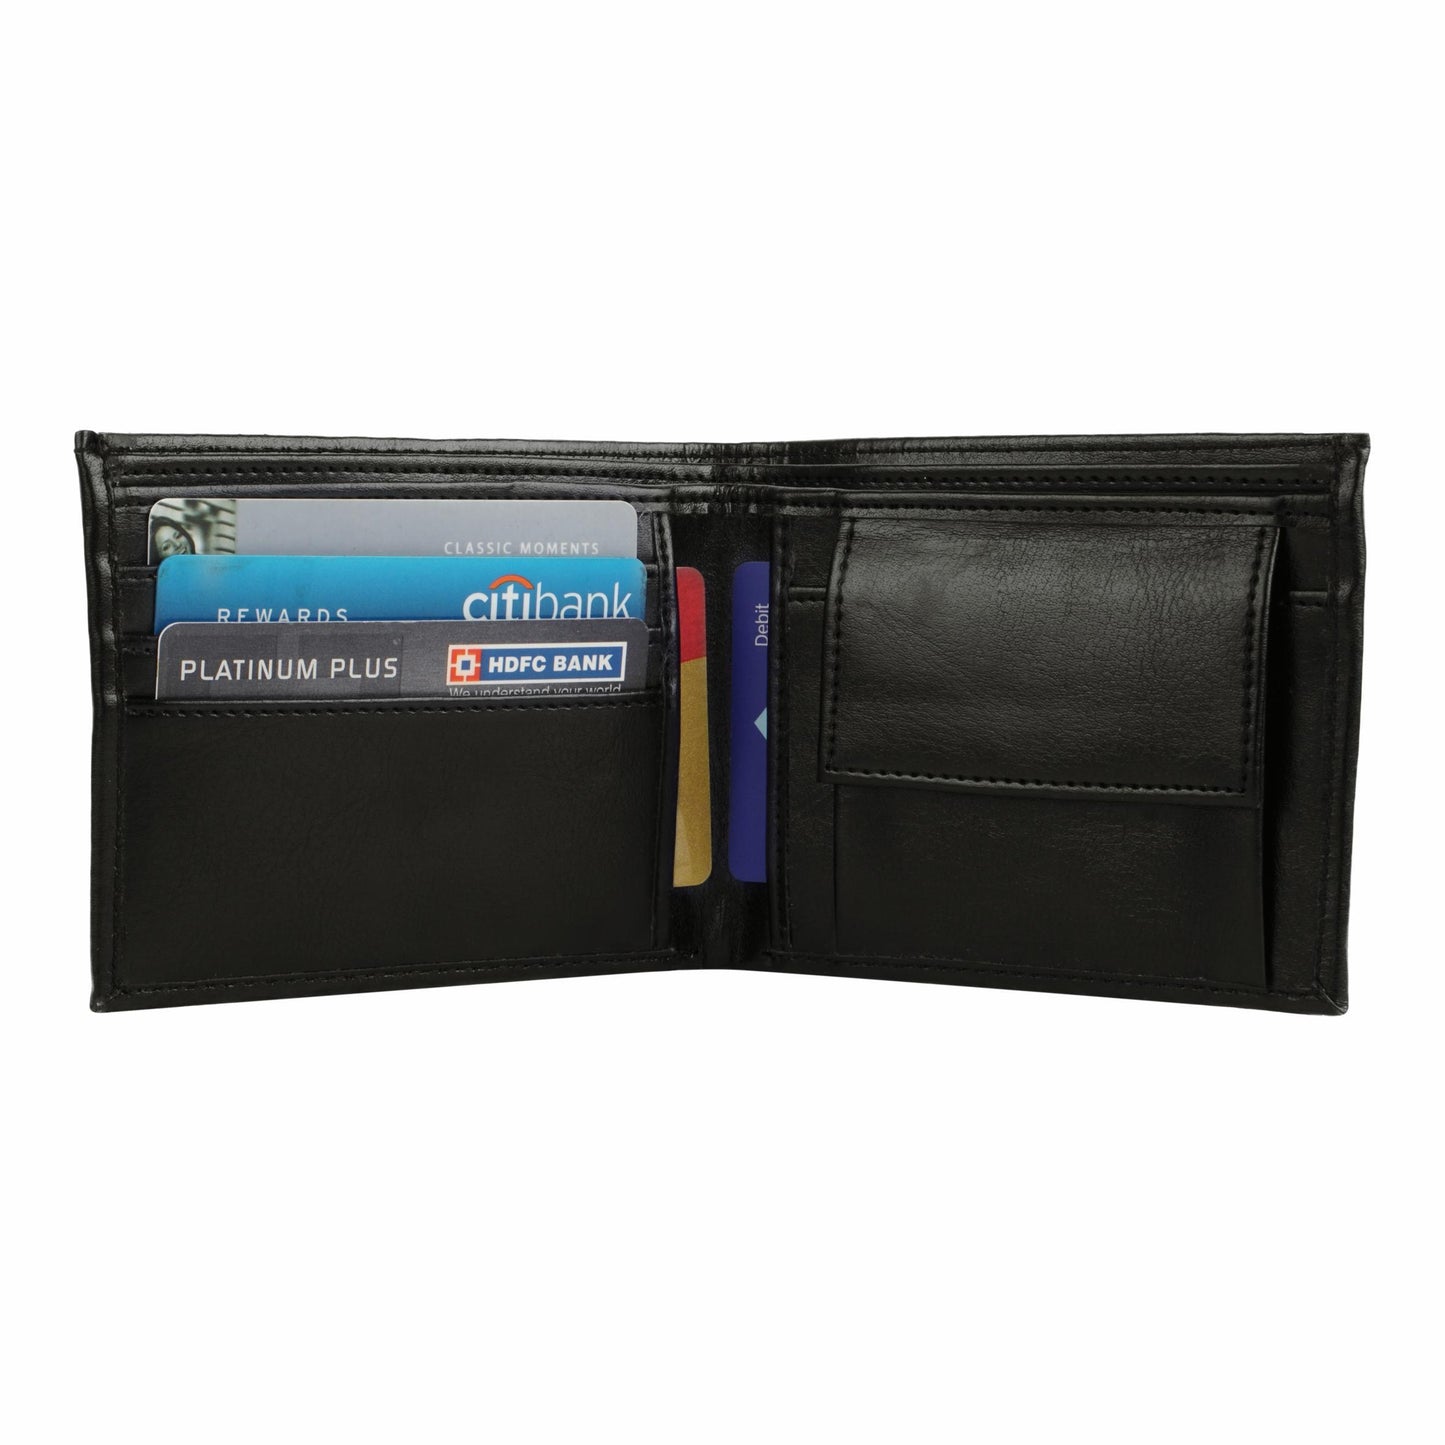 Pen and Wallet 2in1 Combo Gift Set - For Employee Joining Kit, Corporate, Client or Dealer Gifting, Promotional Freebie JKSR129